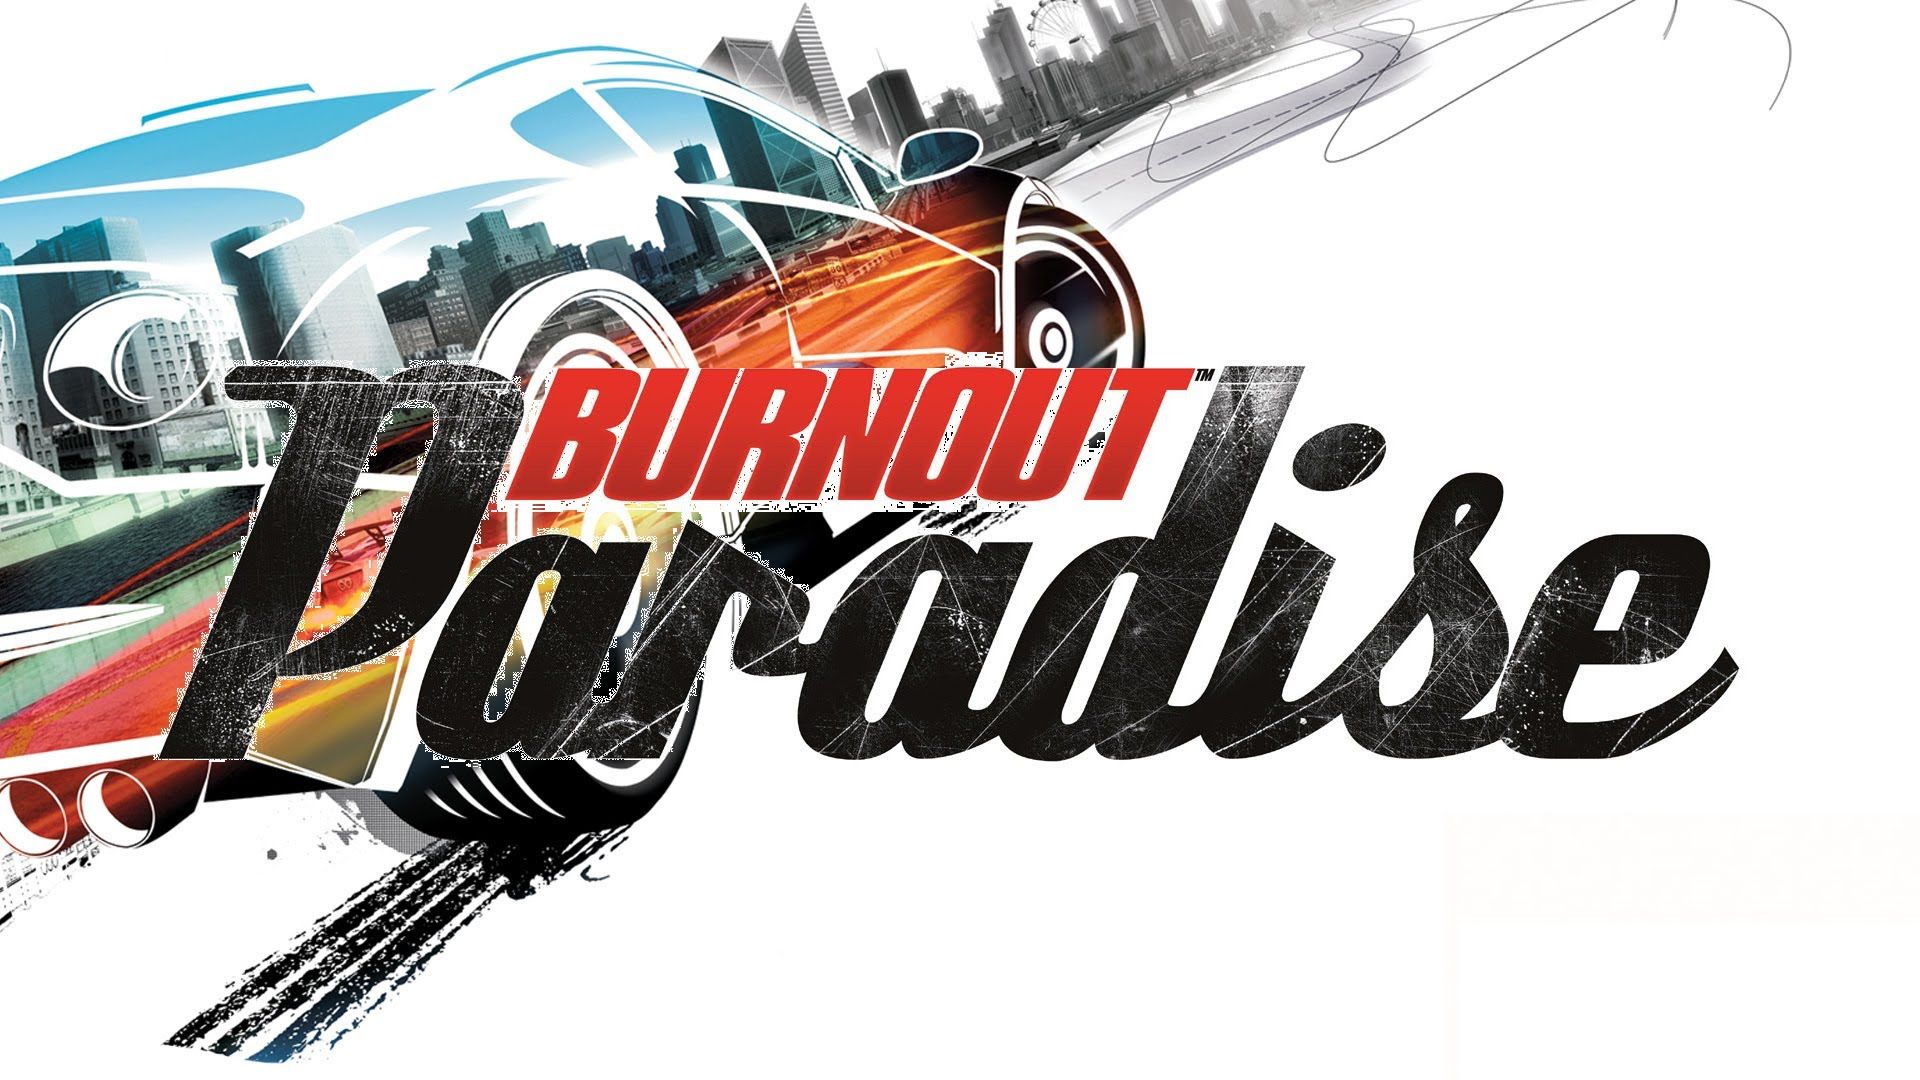 It looks like a Burnout Paradise HD remaster might be arriving